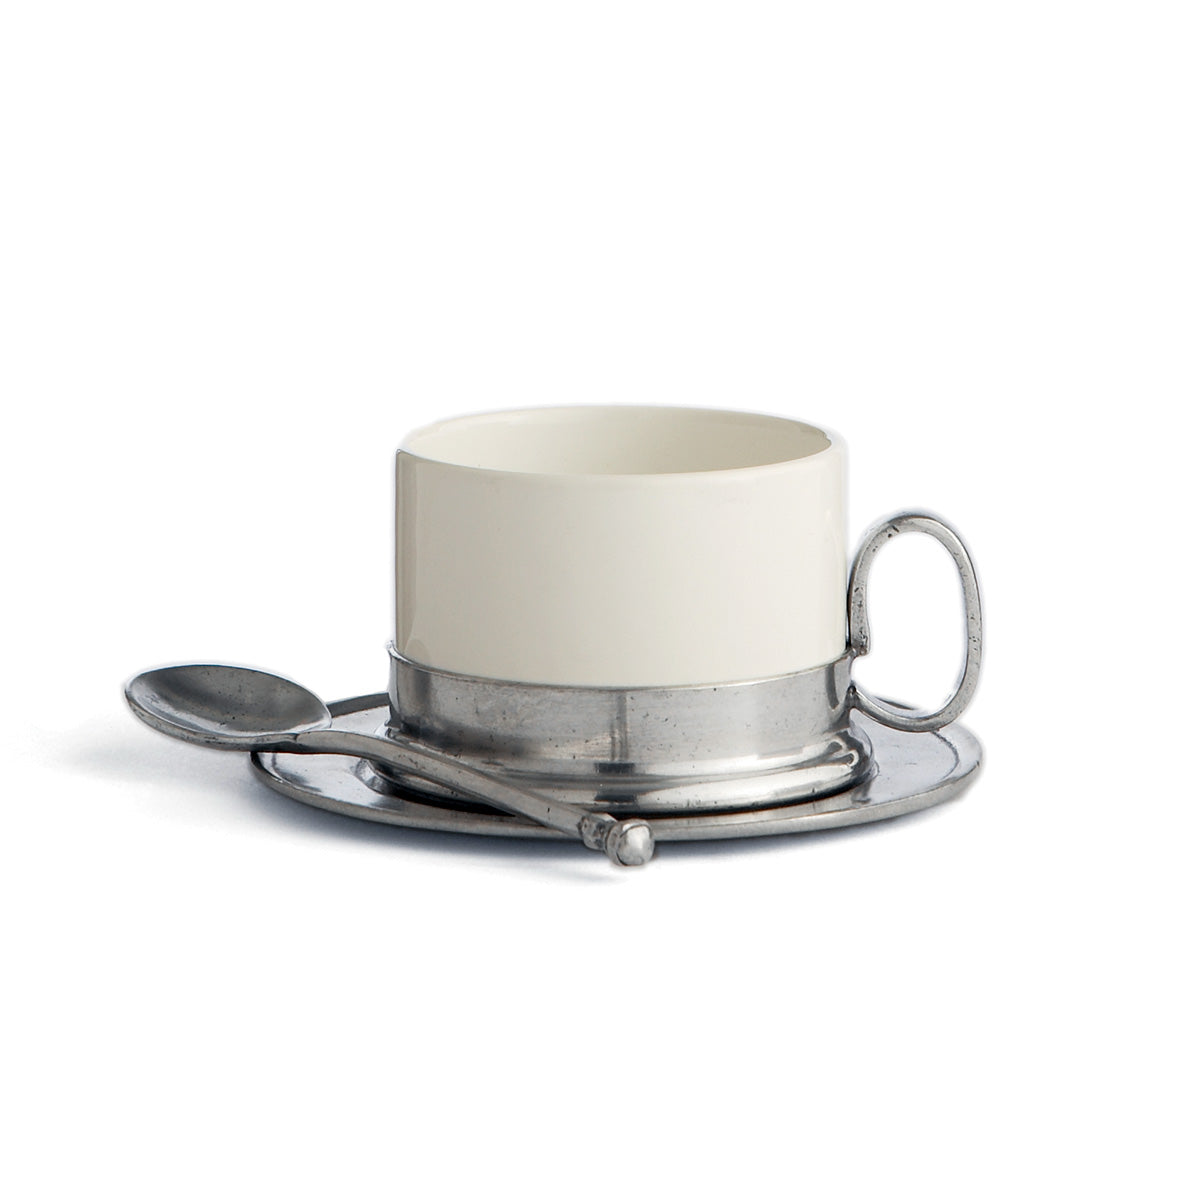 Saucer & Spoon Cup Italica with – Tuscan Arte Cappuccino